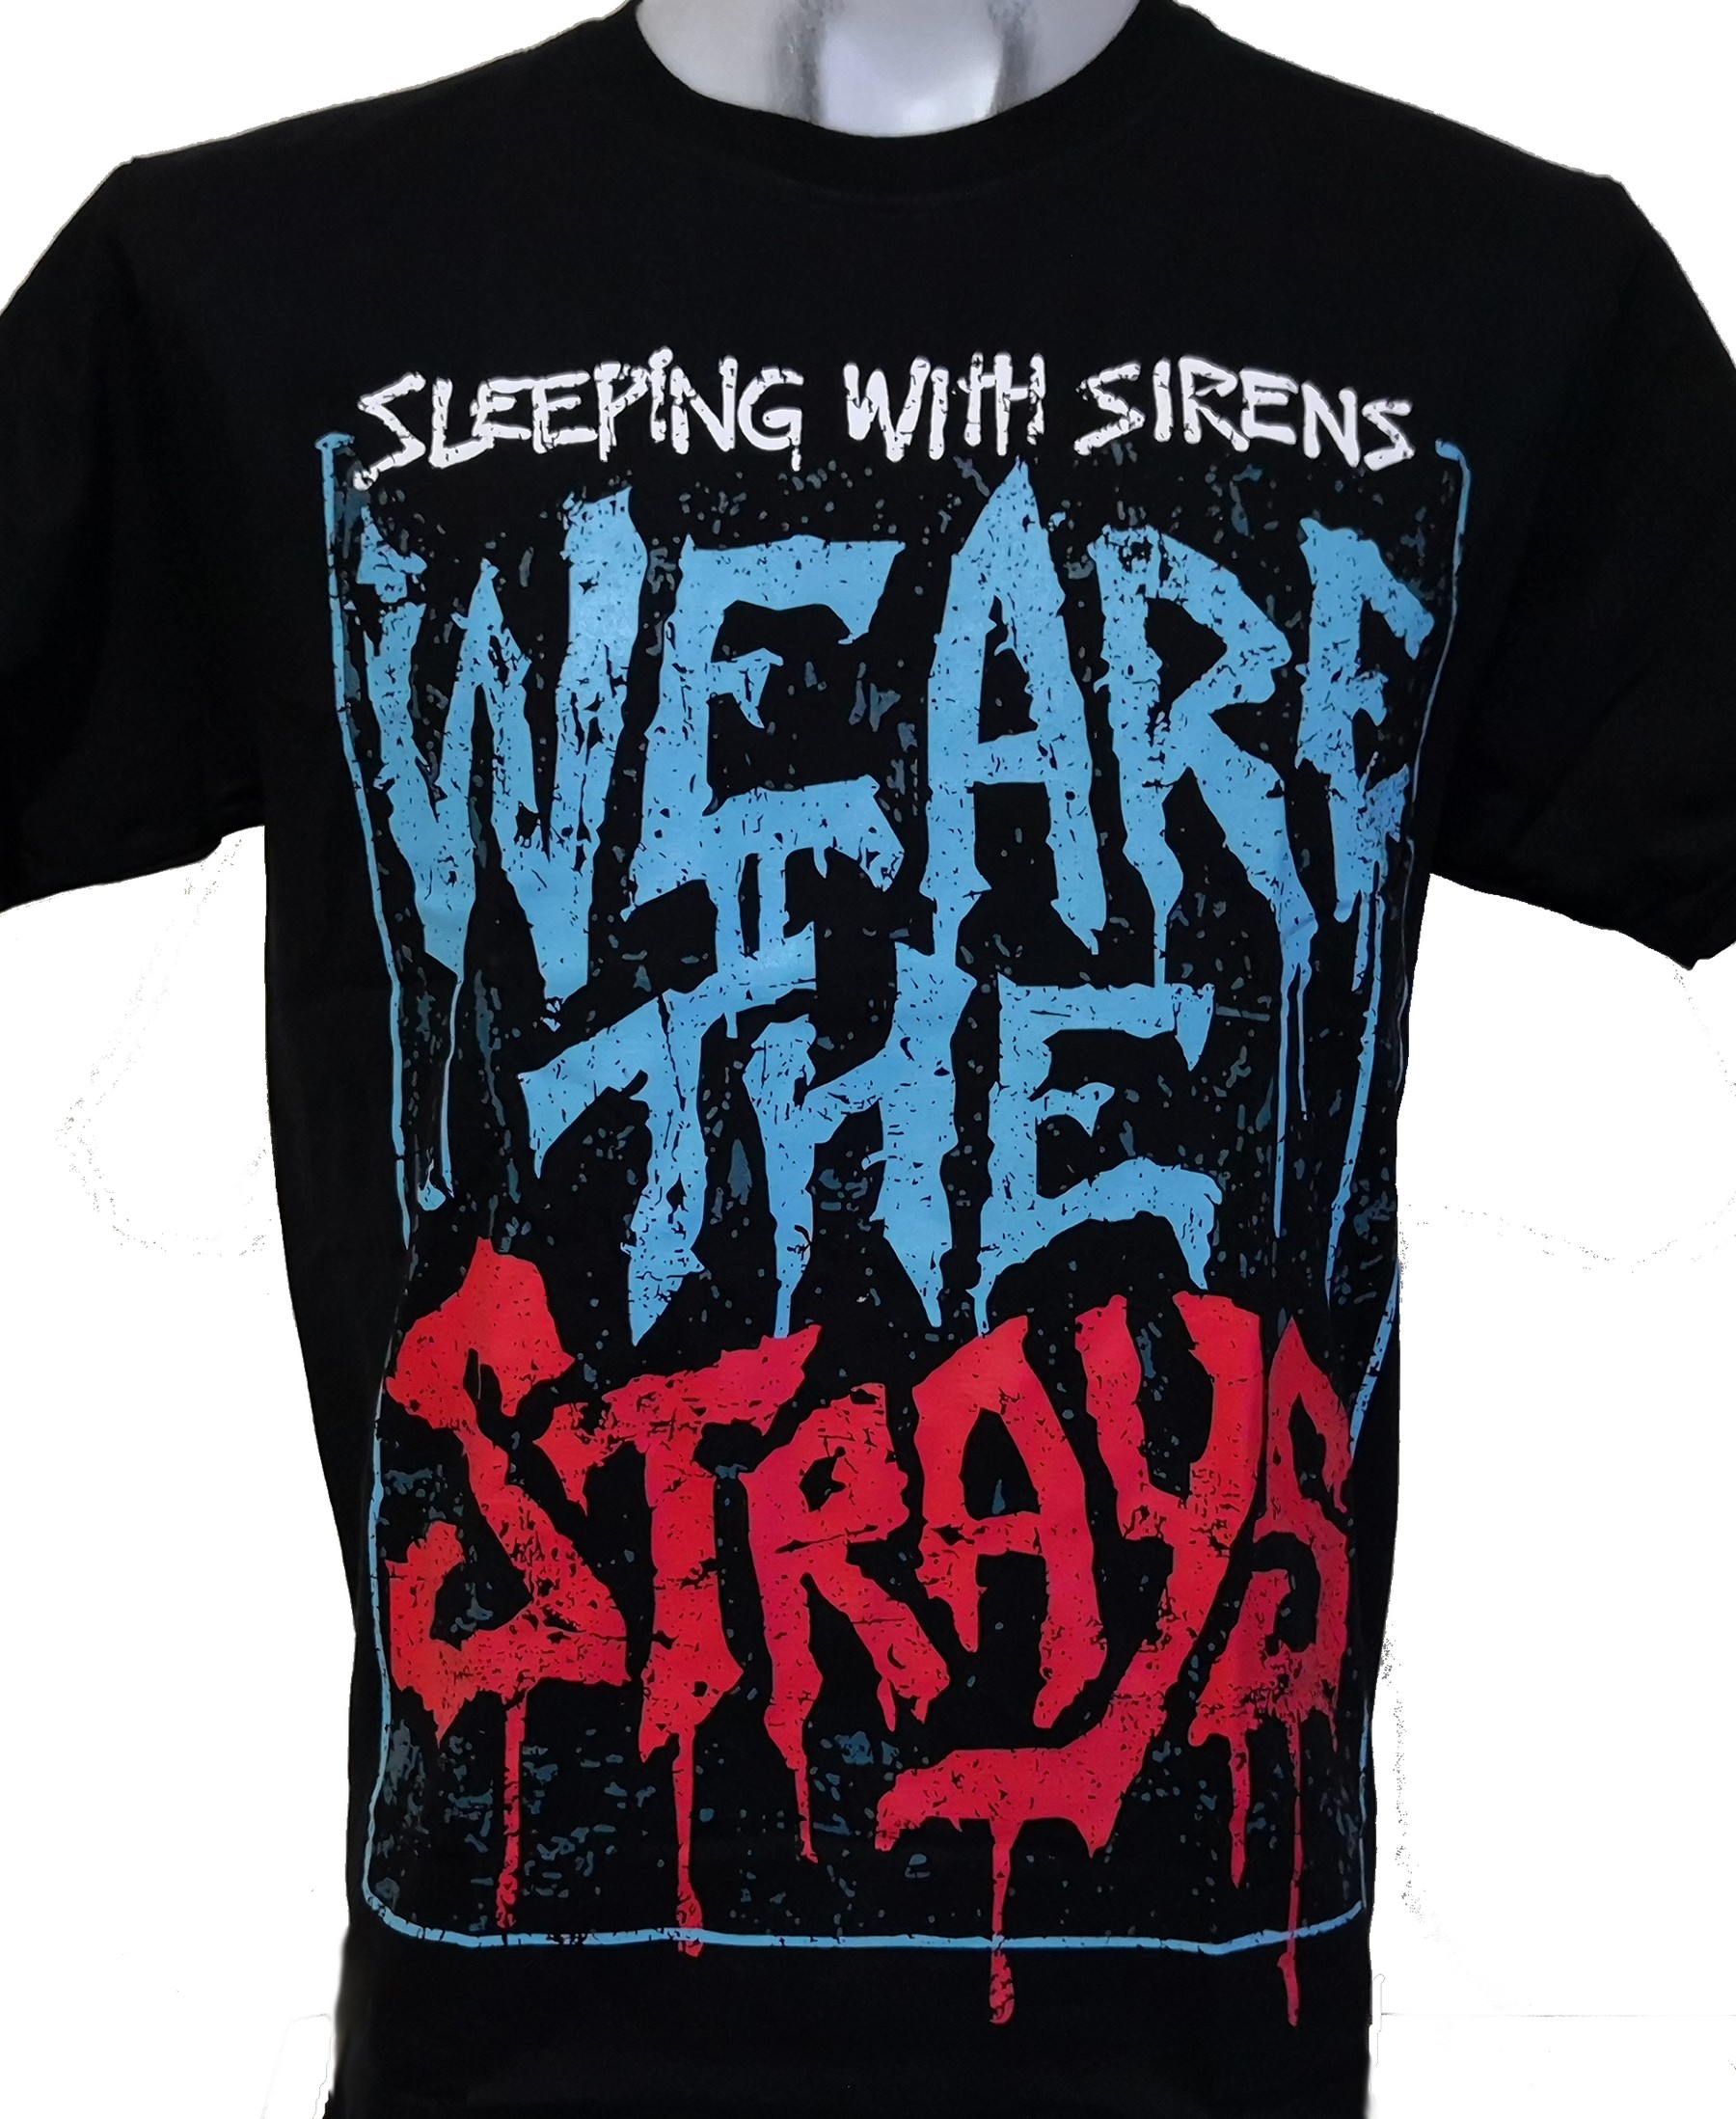 Rock Out with Sirens: Official Sleeping With Sirens Merchandise Store